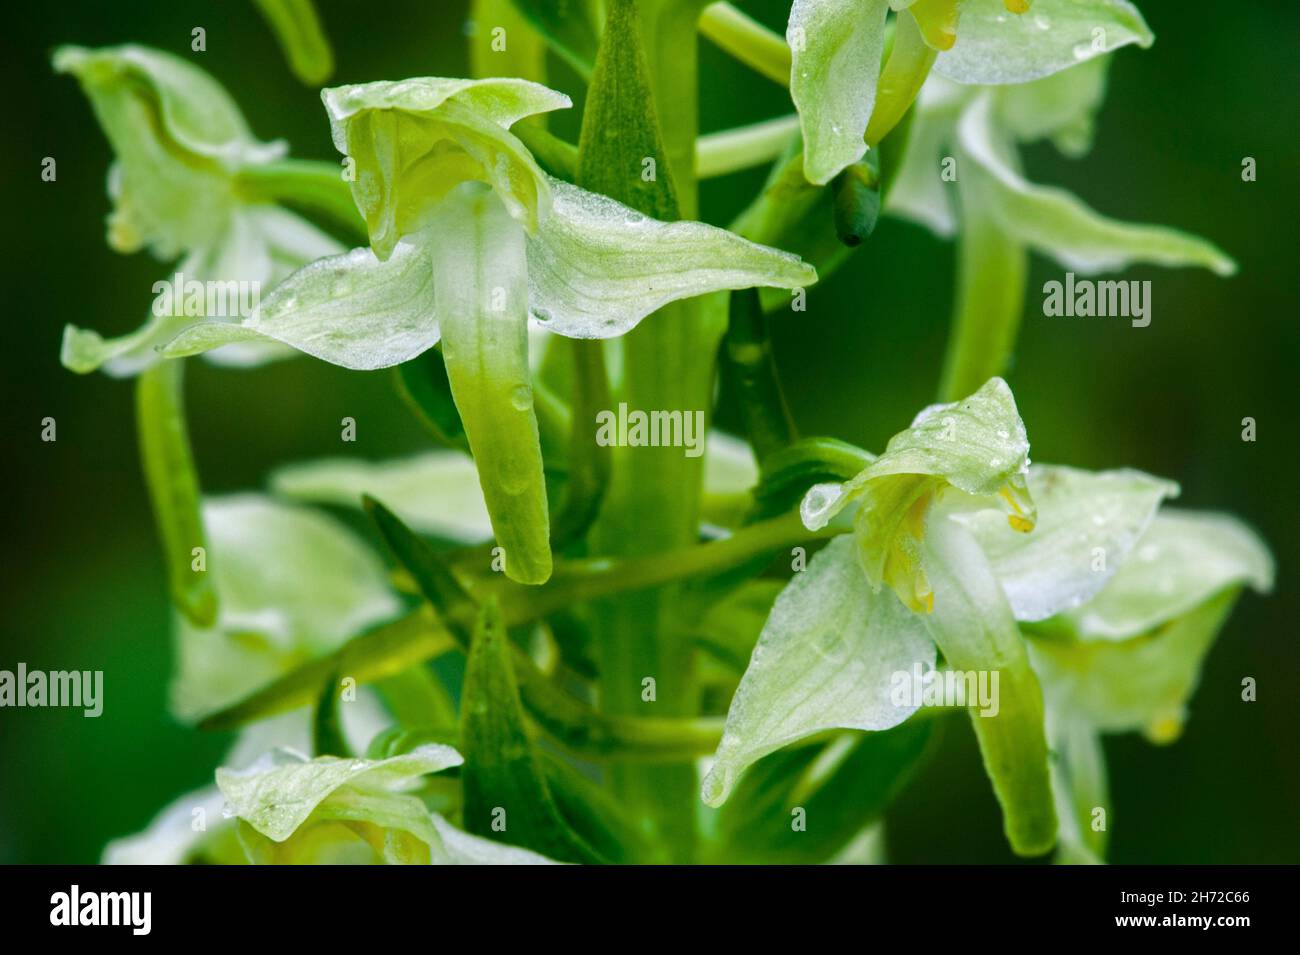 Greater butterfly-orchid (Platanthera chlorantha / Platanthera montana / Orchis chlorantha) in flower Stock Photo